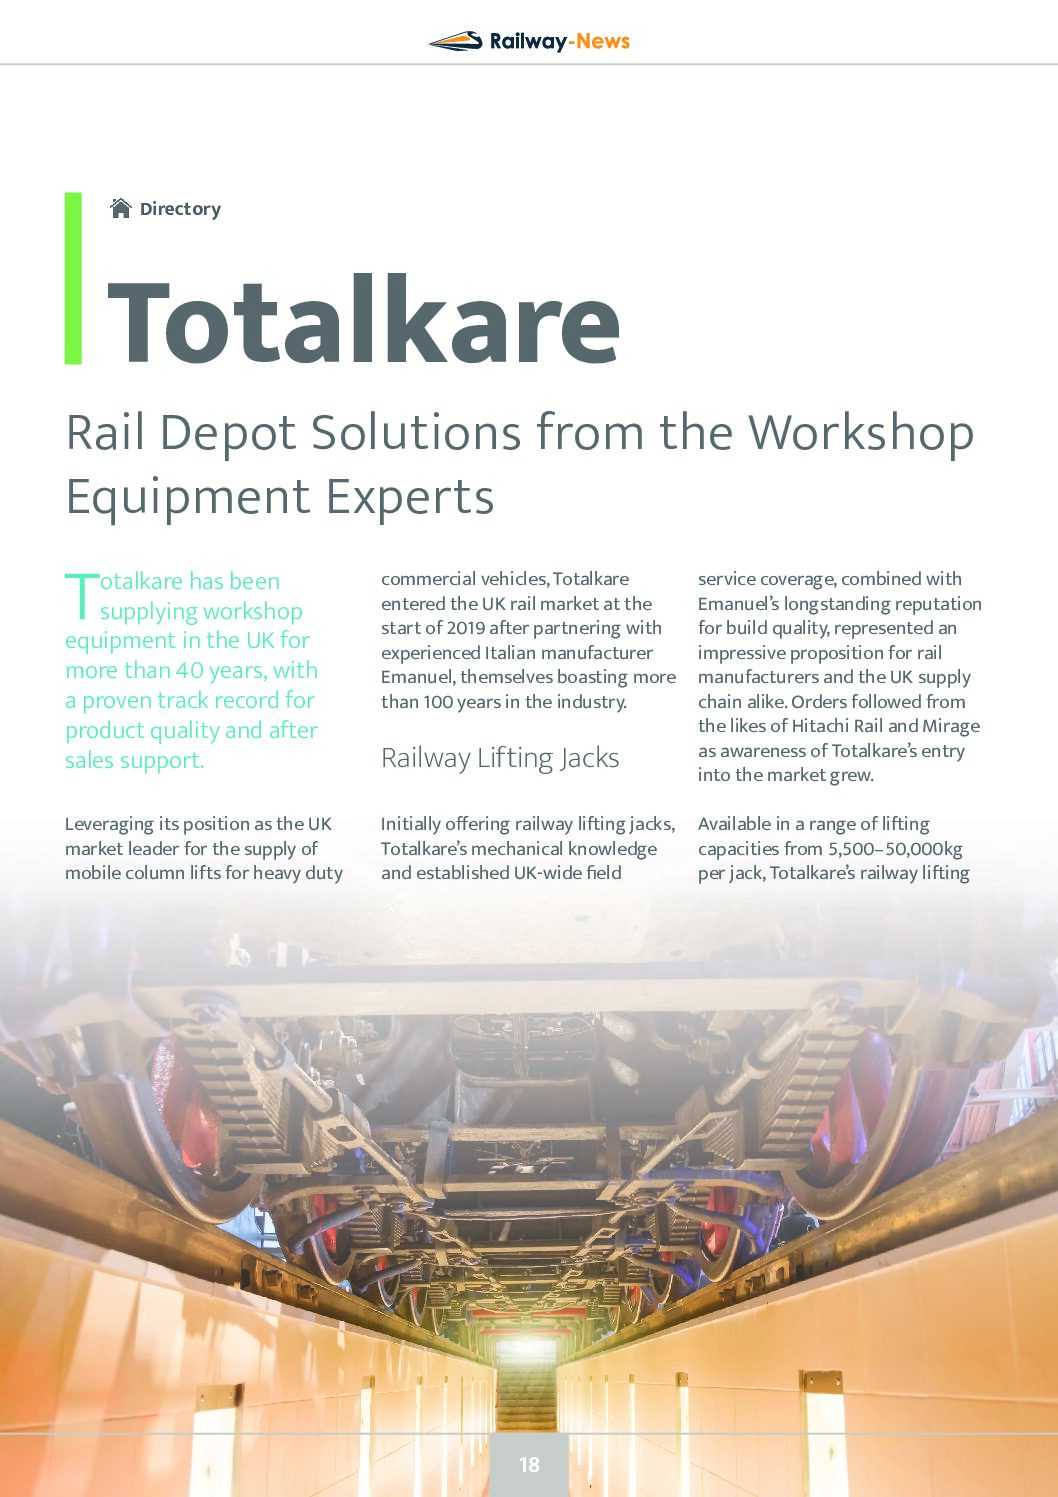 Rail Depot Solutions from the Workshop Equipment Experts